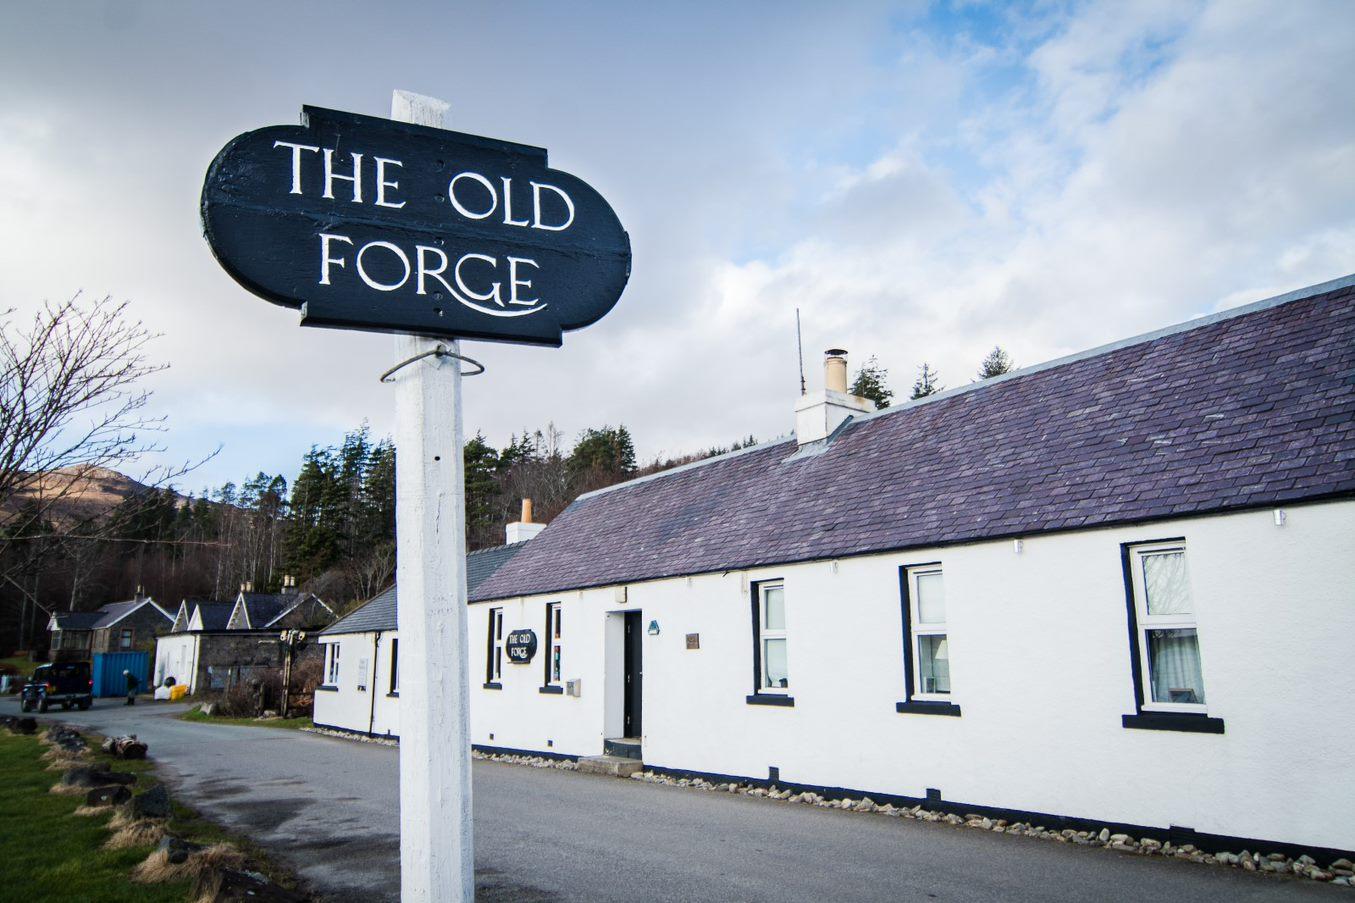 Plans to buy Britain's most remote pub move forward thanks to SLF funding